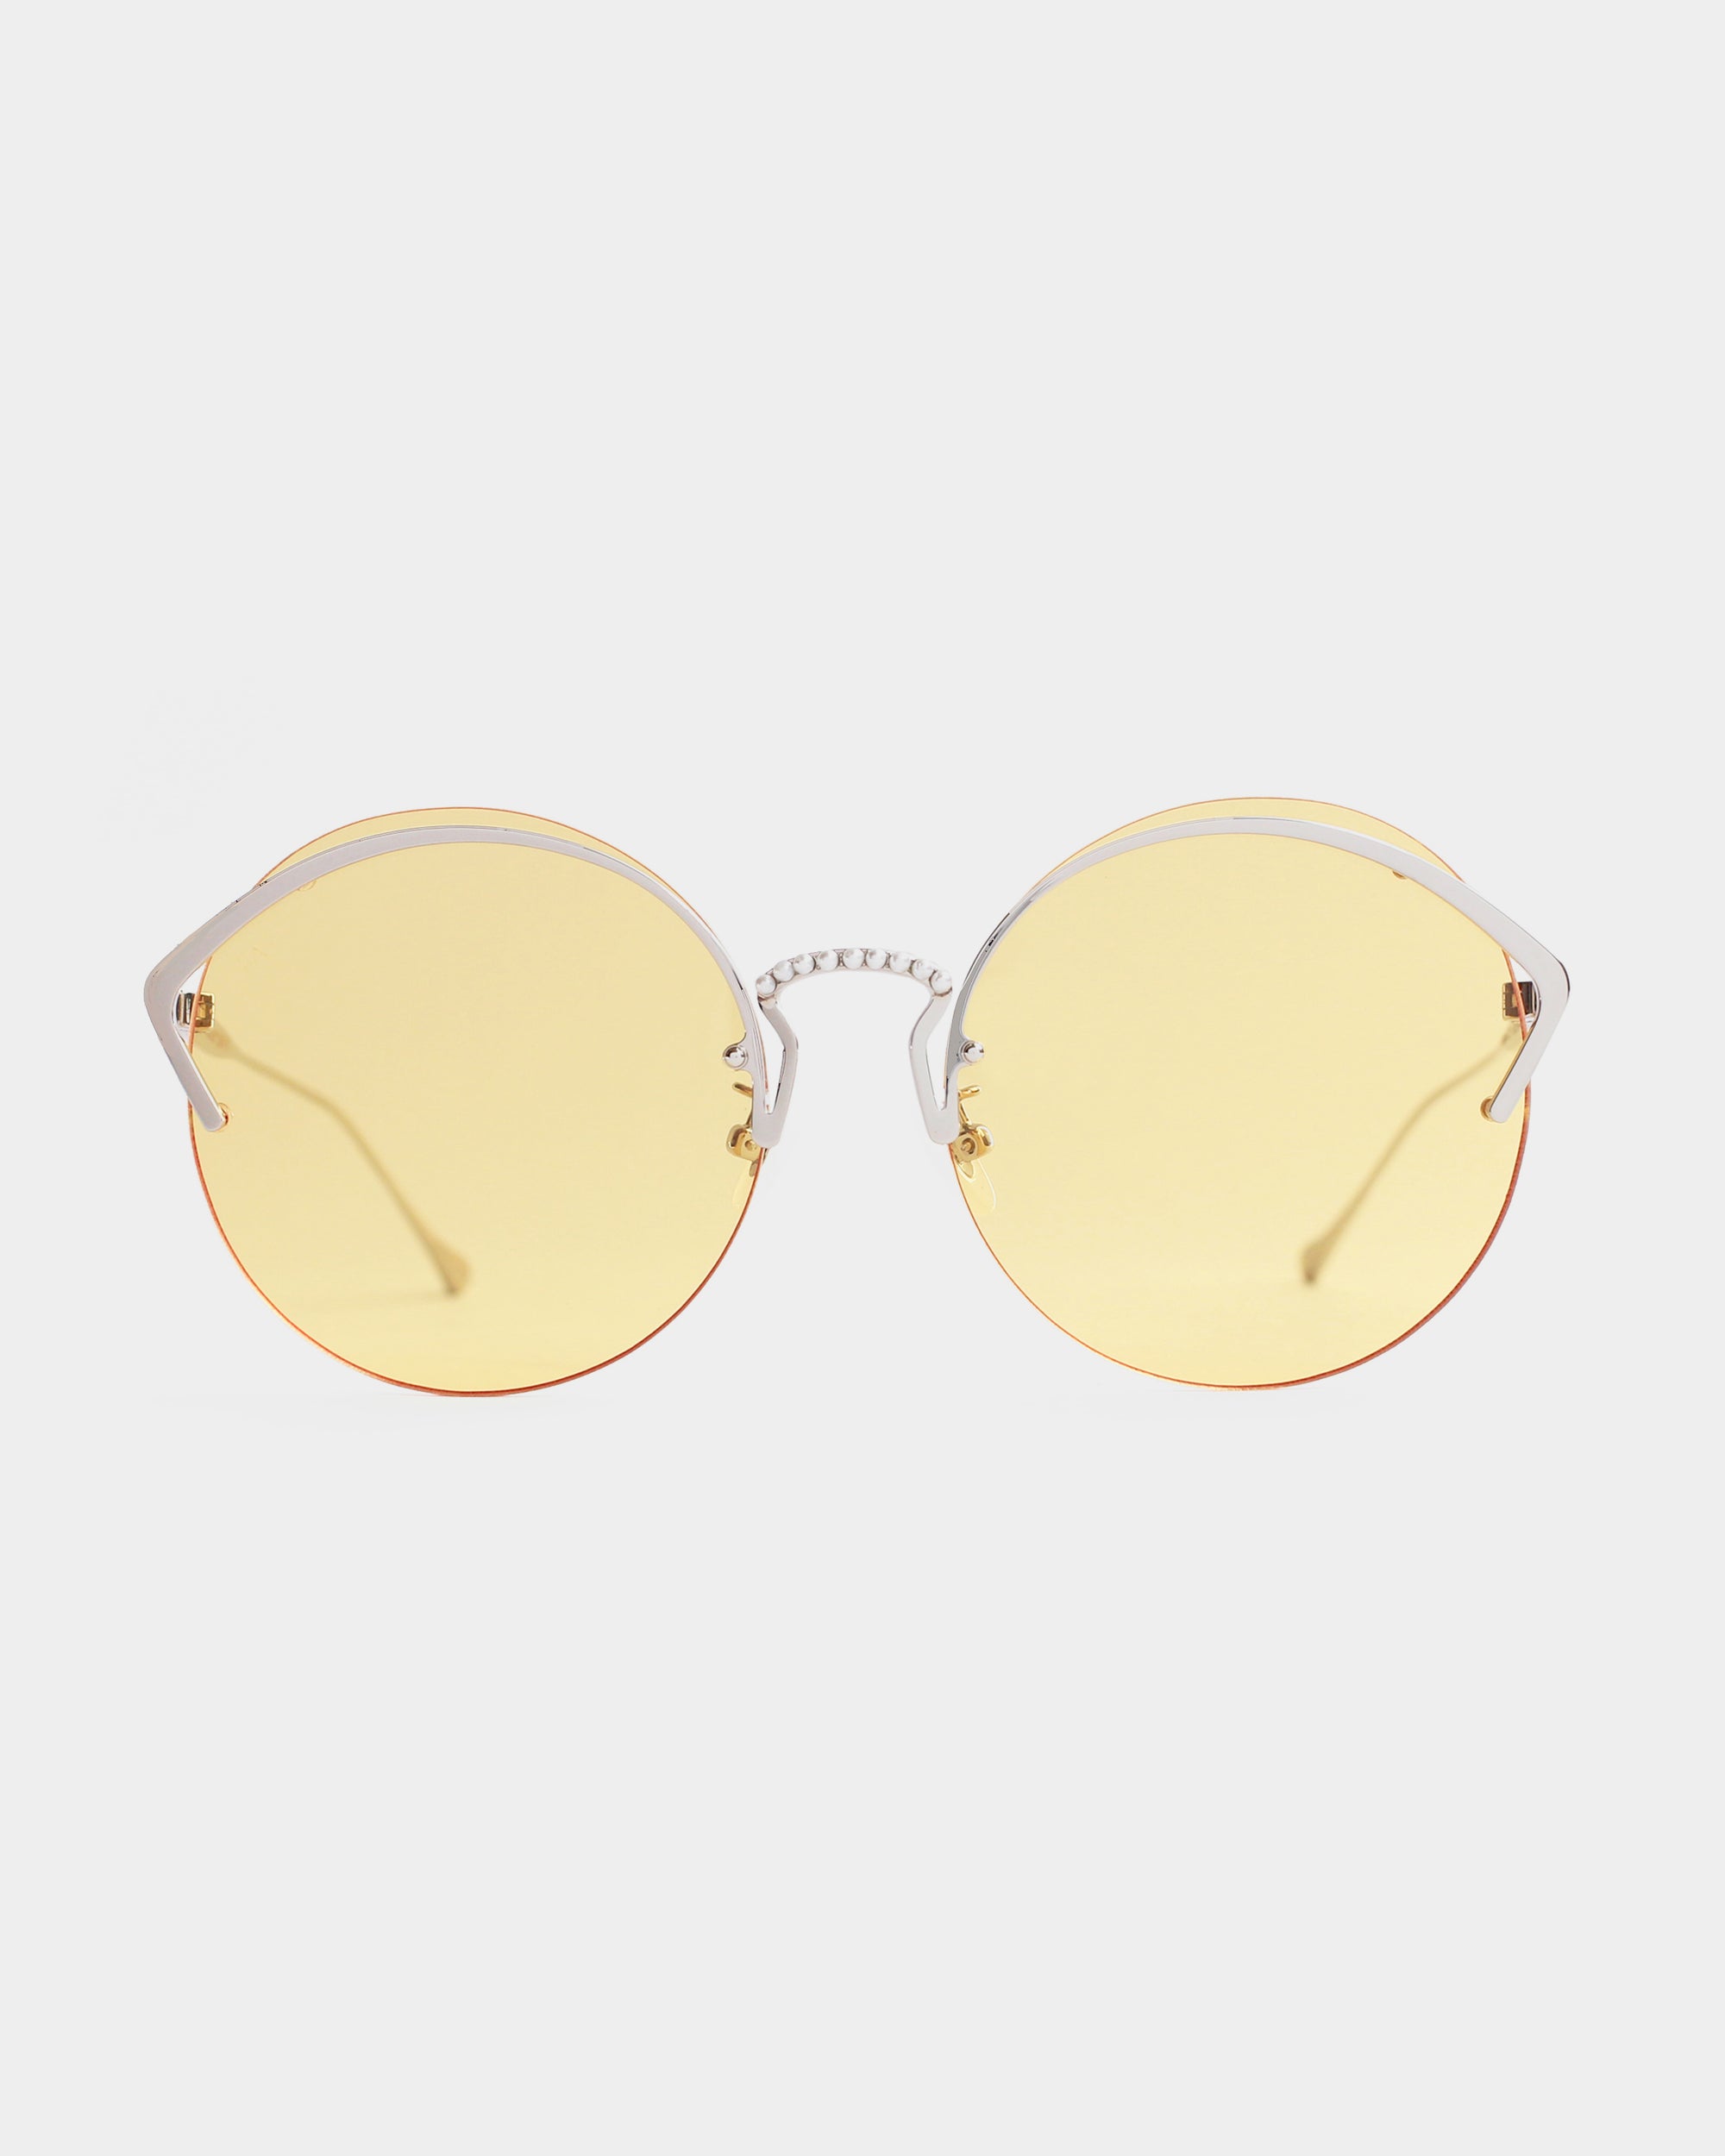 A pair of Margarita sunglasses by For Art&#39;s Sake® with yellow-tinted nylon lenses and a stainless steel frame. The sunglasses feature thin, curved temples and a unique bridge design, ensuring both UV protection and stylish appeal. The background is plain white.